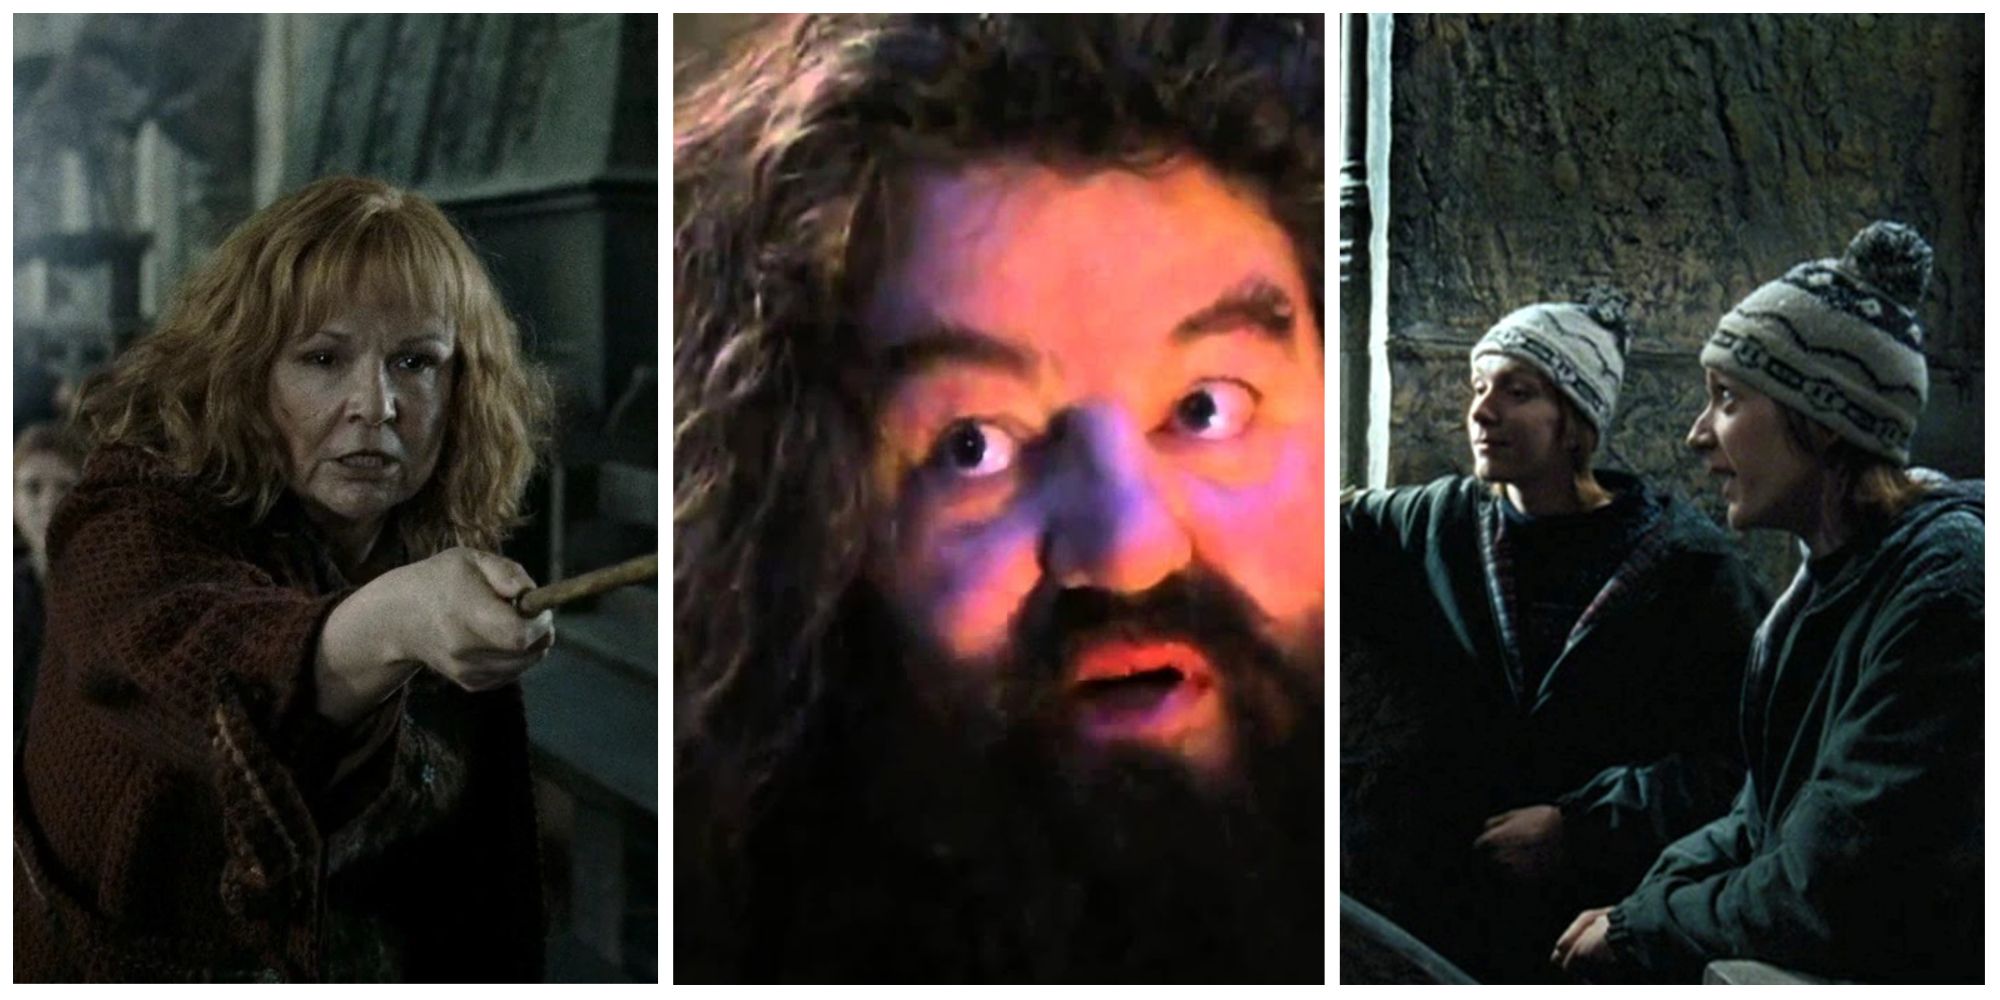 Julie Walters as Molly Weasley. Robbie Coltrane as Rubeus Hagrid. James and Oliver Phelps as Fred and George Weasley.